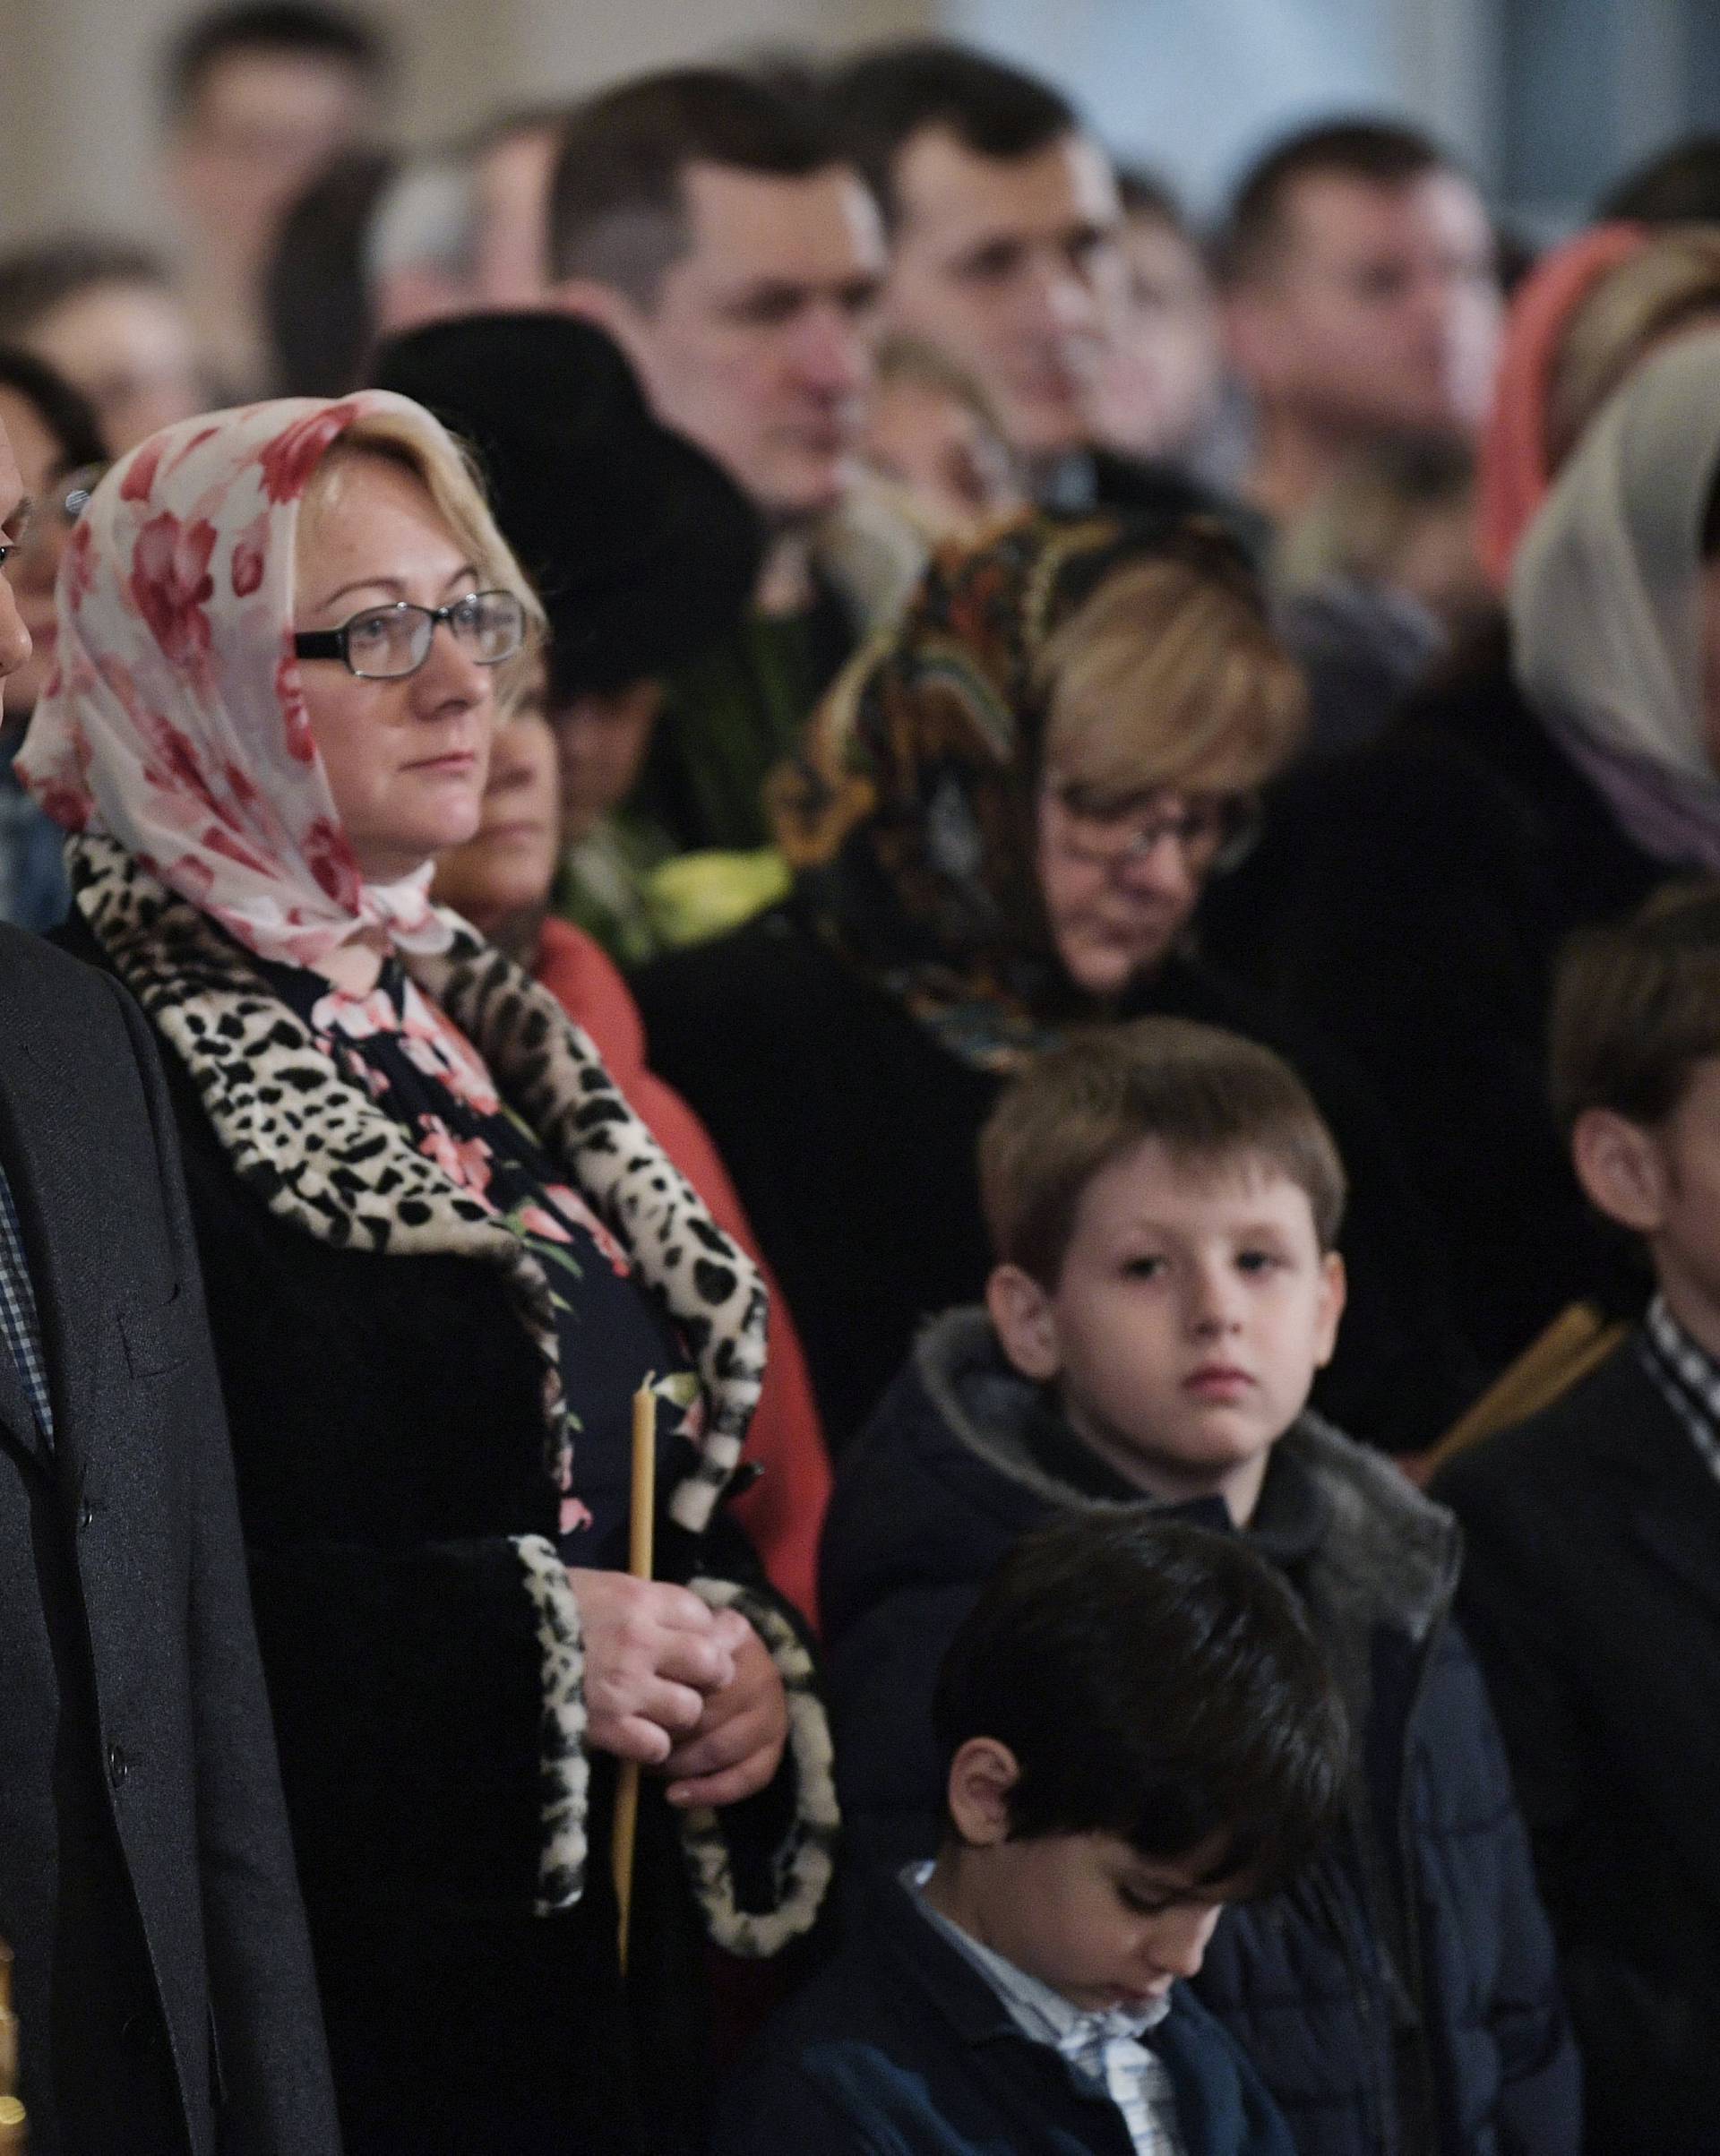 Russian President Vladimir Putin attends a service on Orthodox Christmas at the Church of Saints Simeon and Anna in St. Petersburg